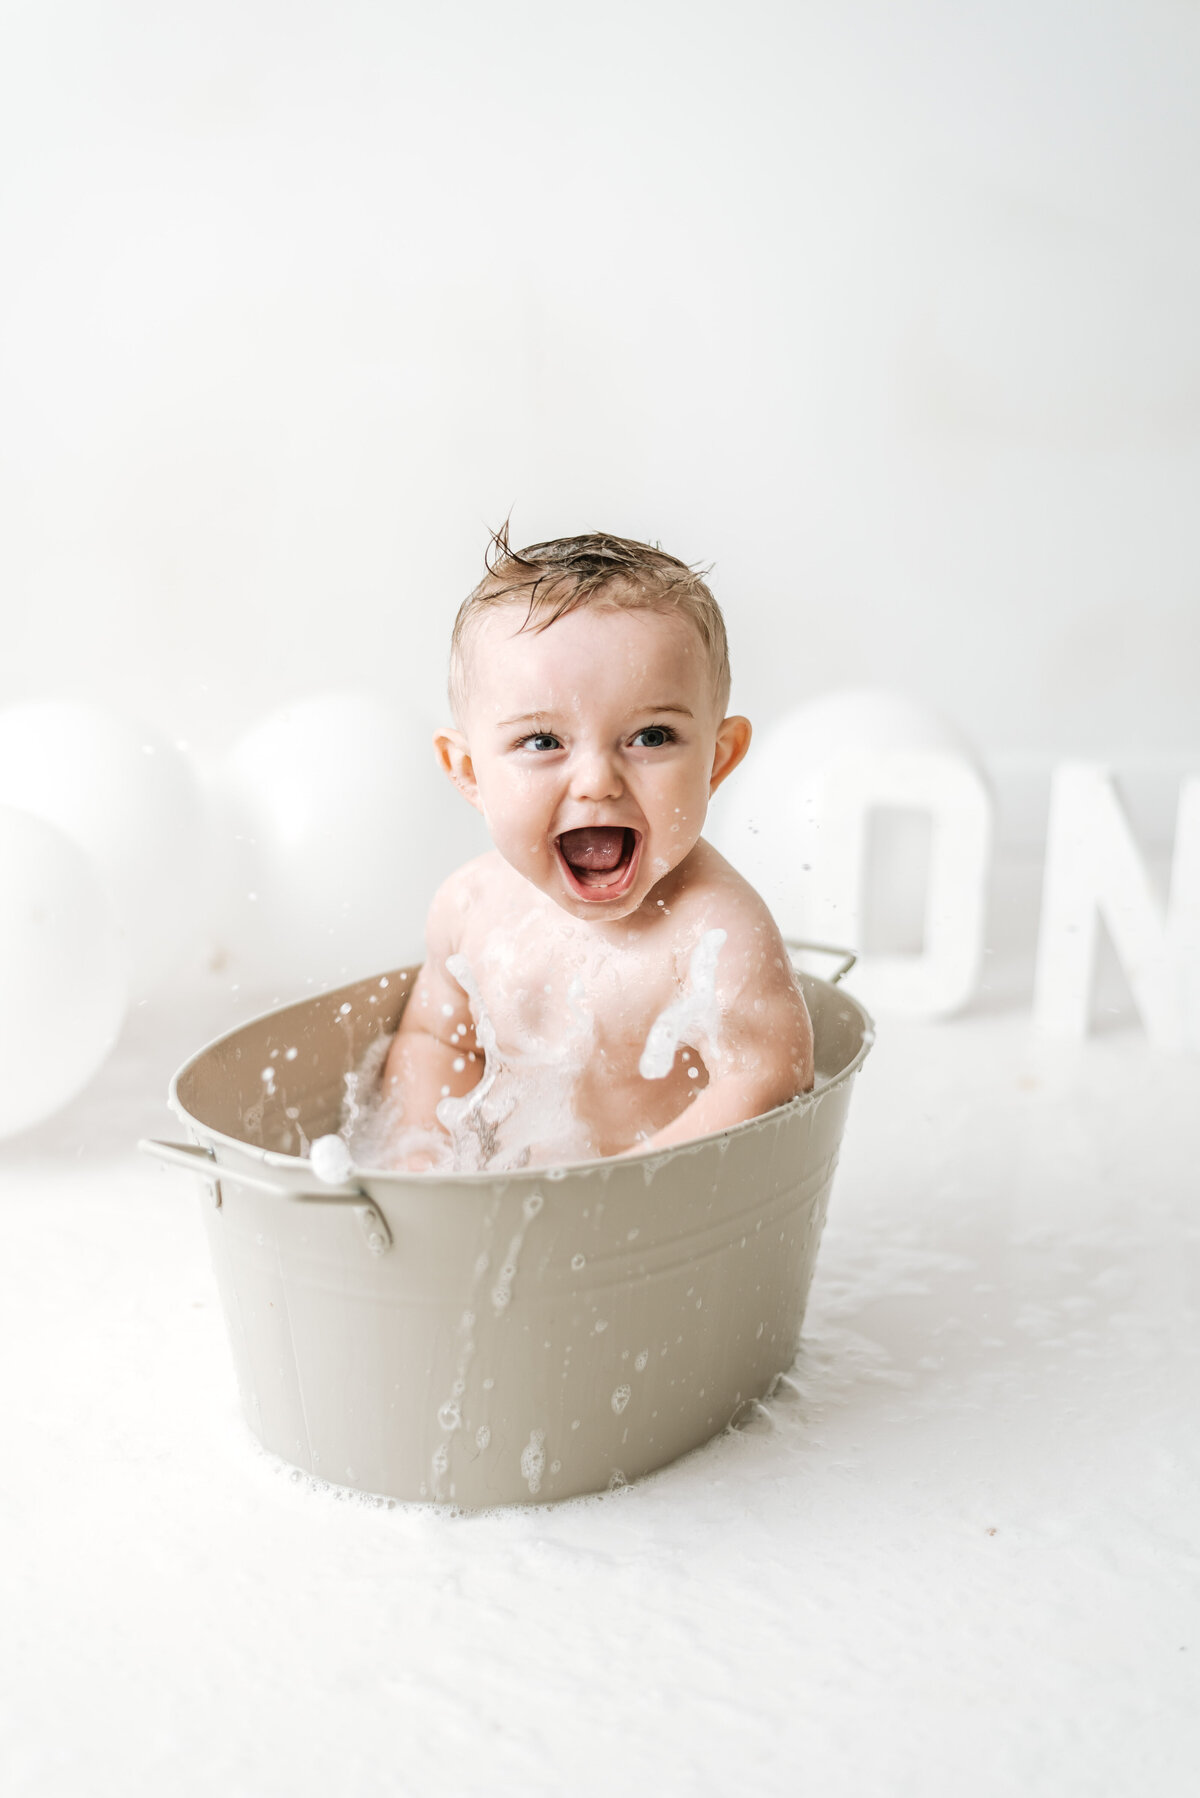 Baby boy splashing water in a bubble bath at a cake smash photoshoot in west sussex